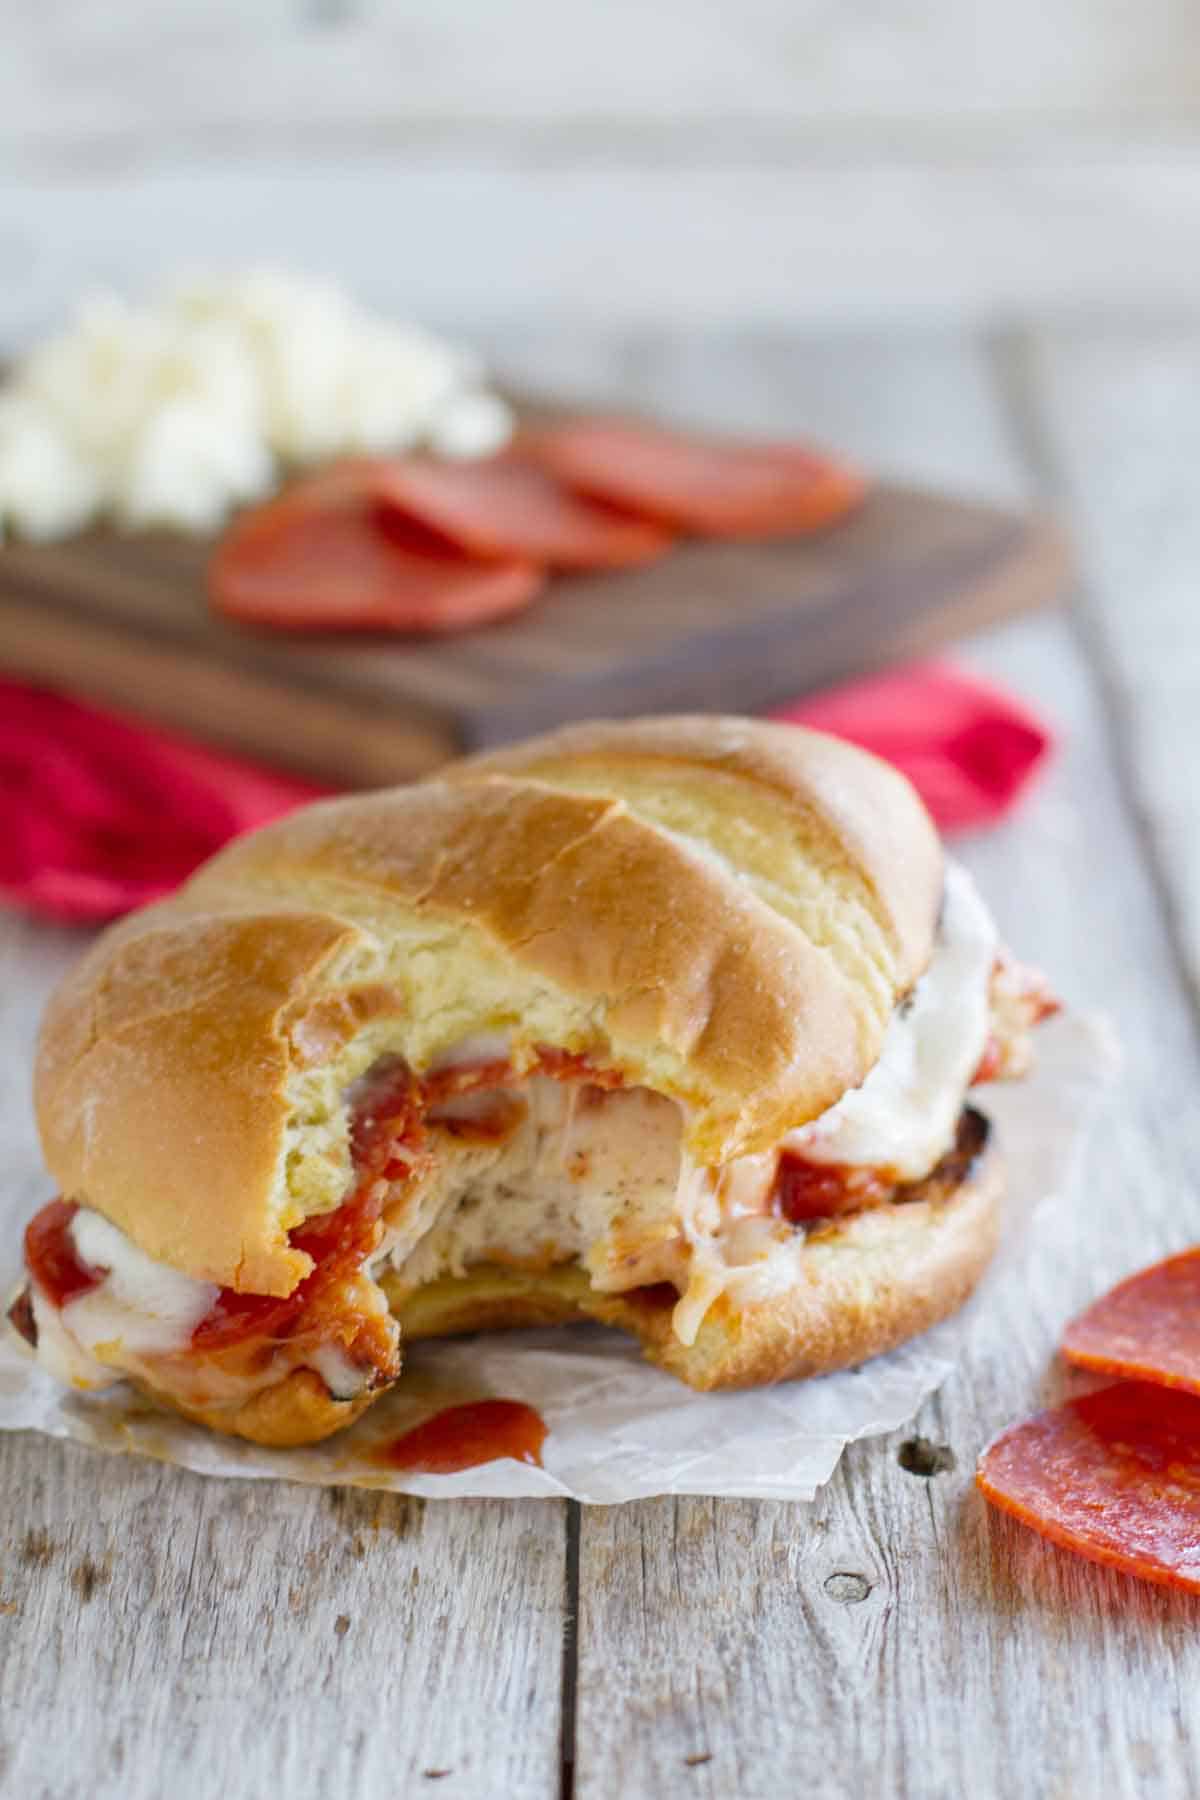 Pizza Topped Grilled Chicken Sandwich with a bite taken from it